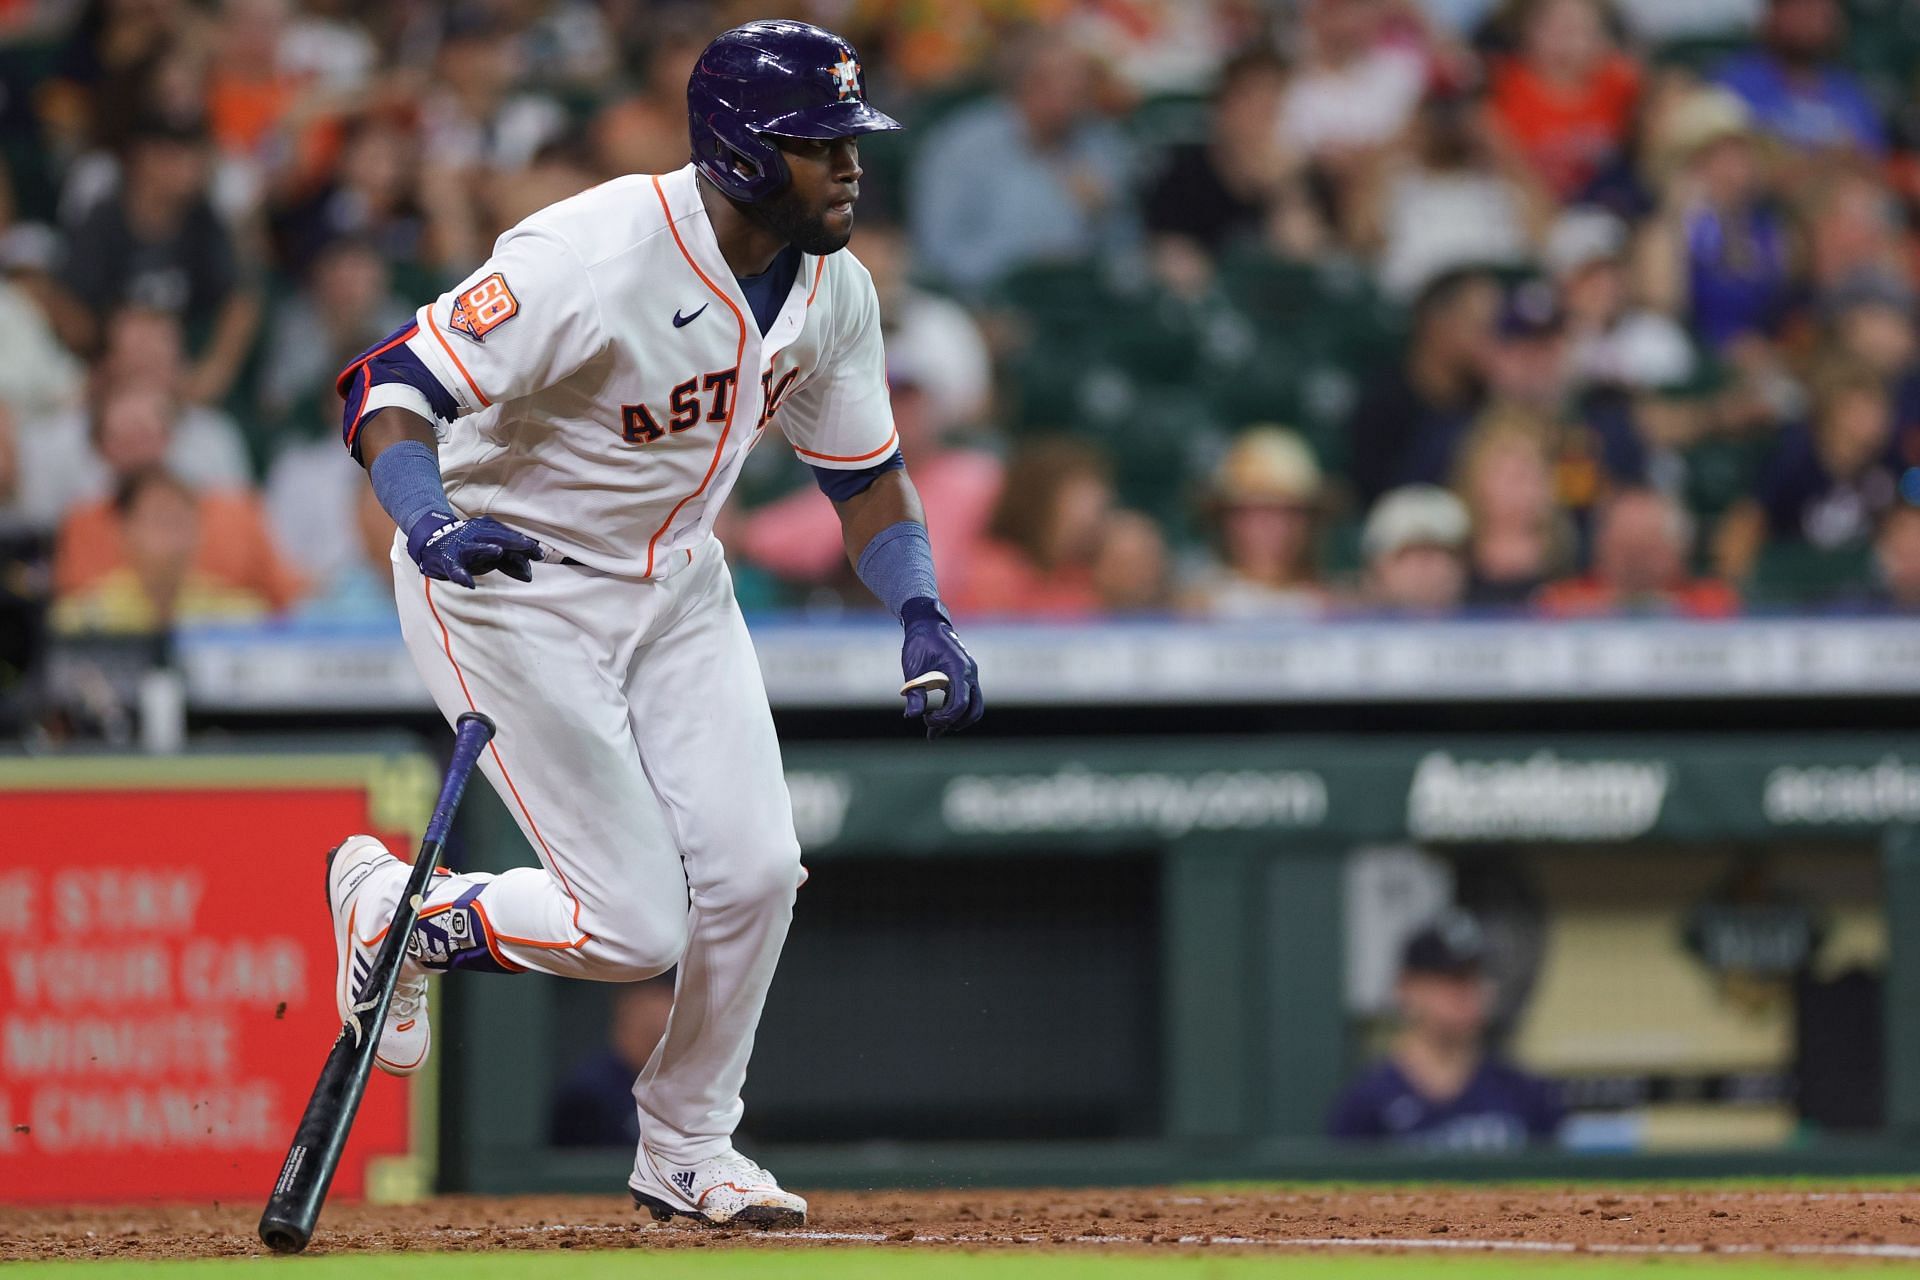 Cuban Yordan Alvarez gets a hit for the Houston Astros in a game against the Seattle Mariners.